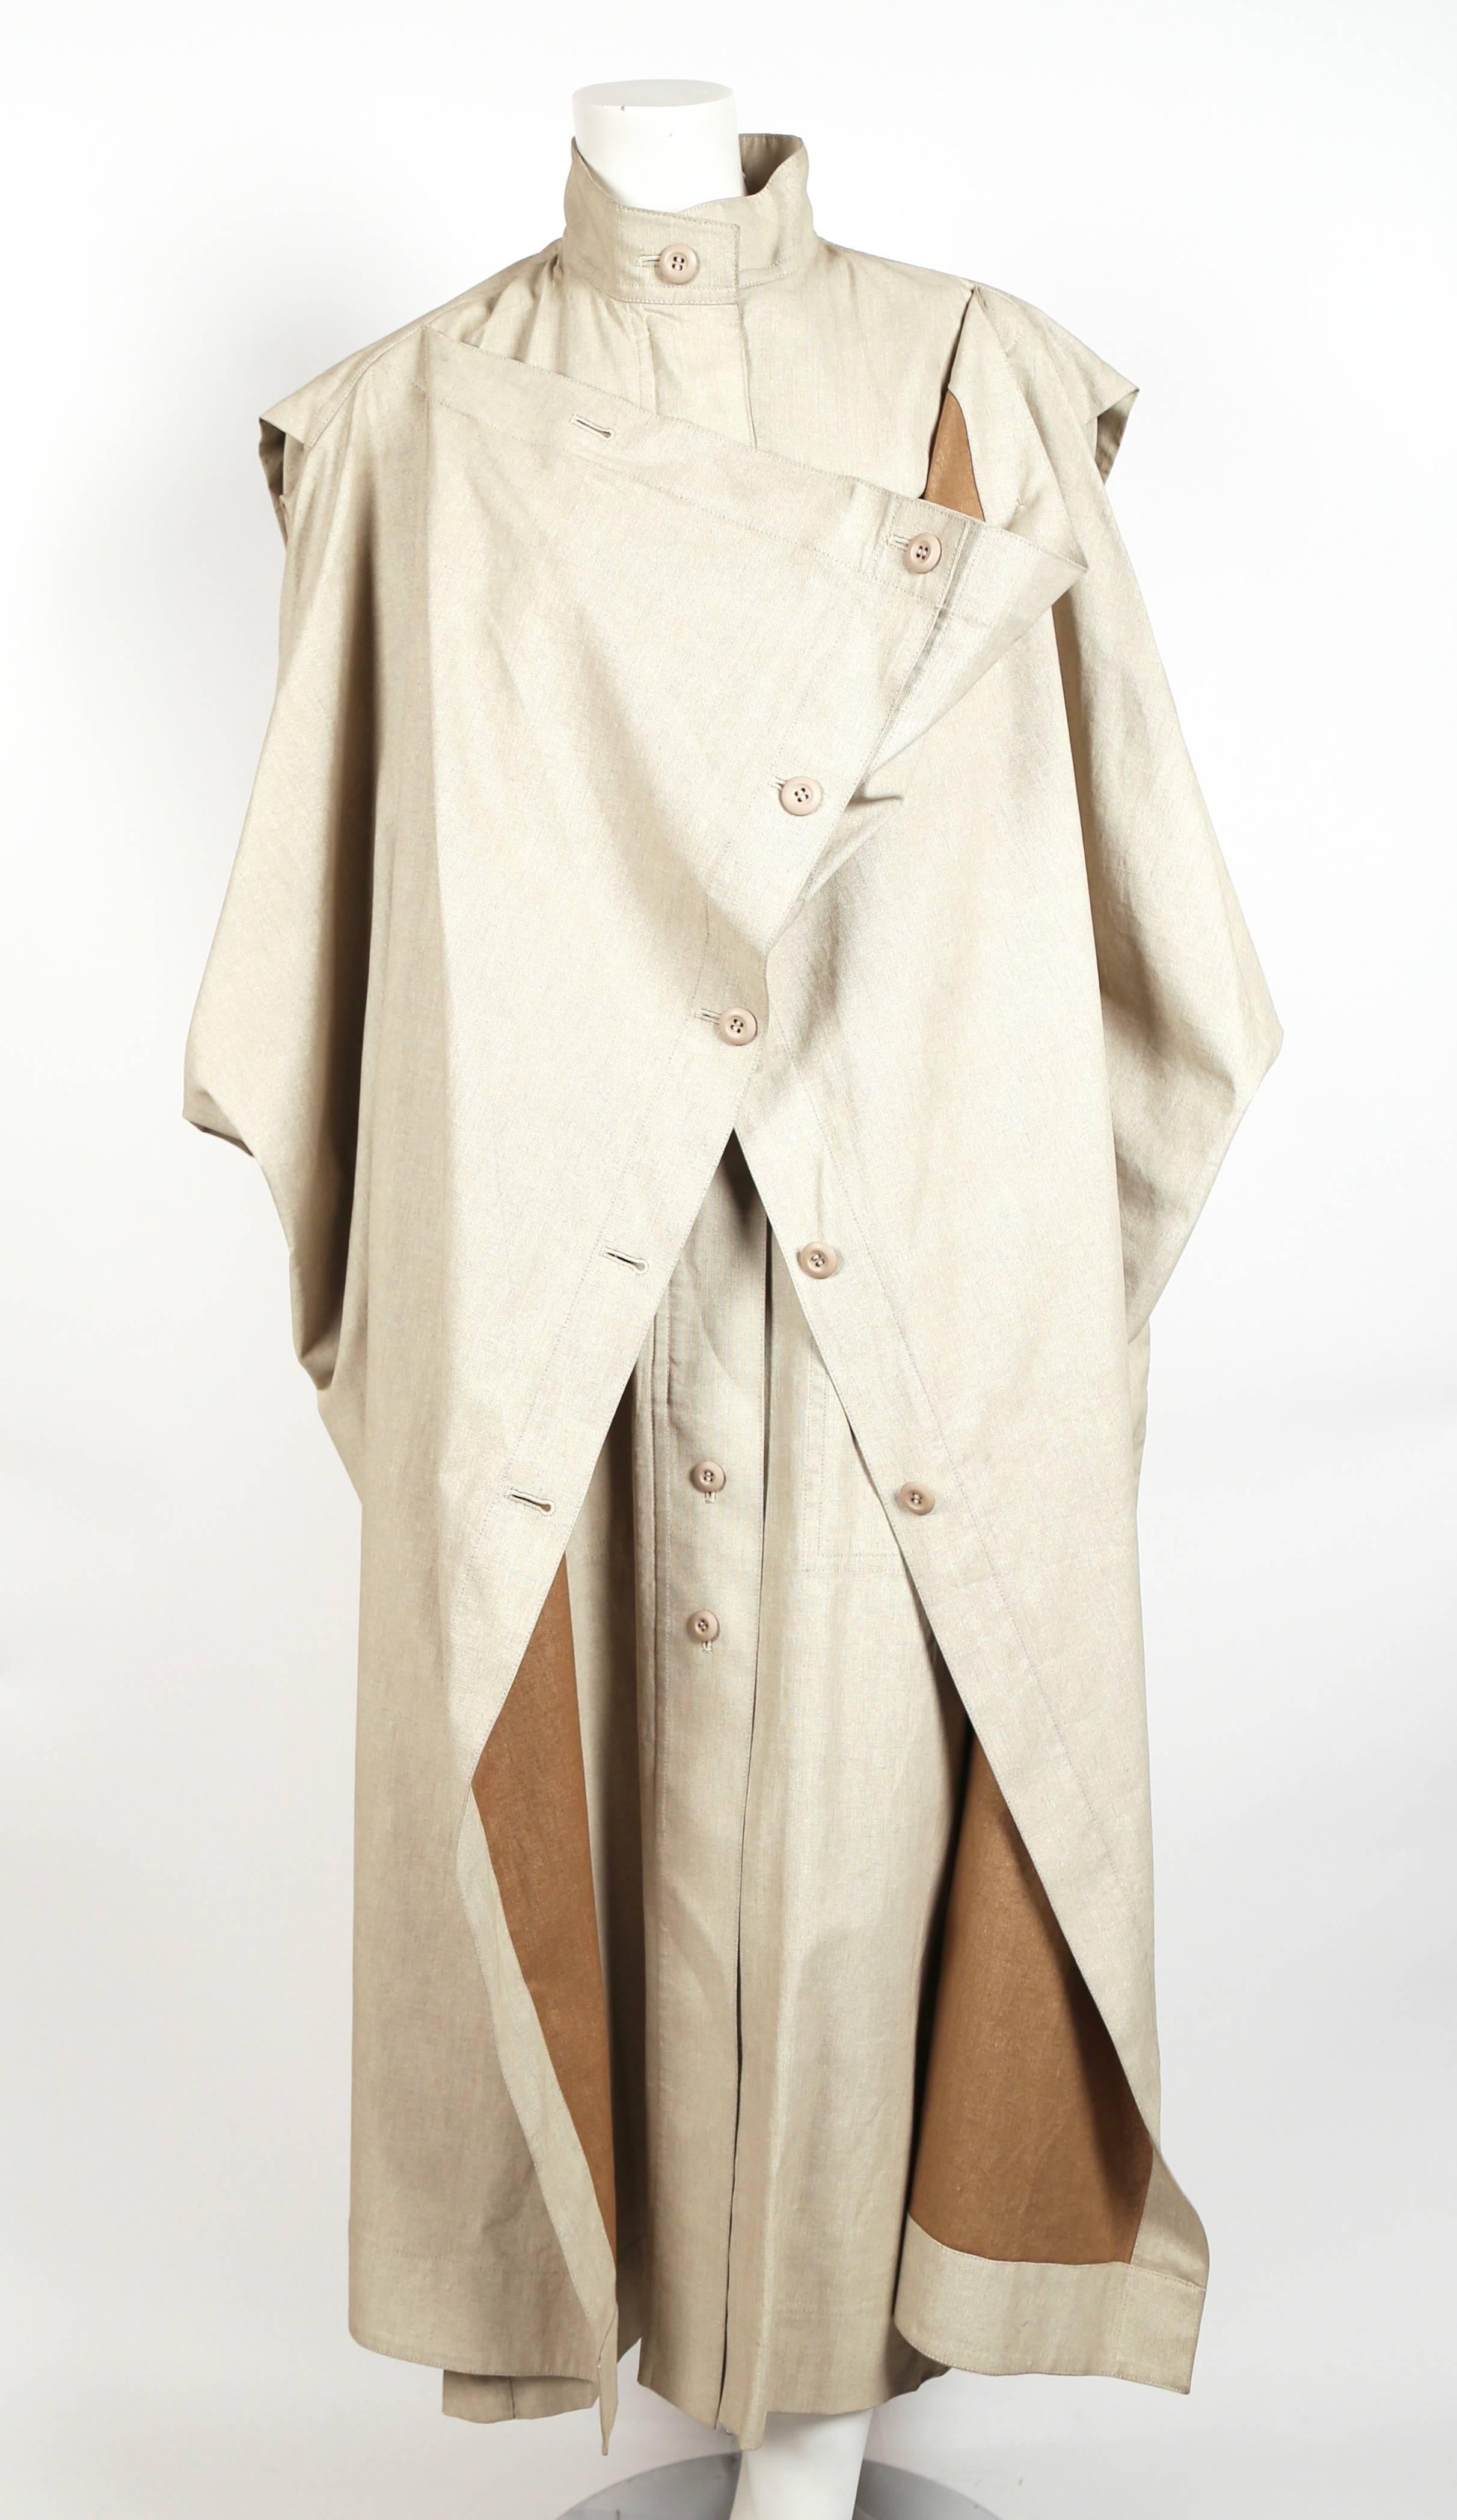 Very rare 1980's tan oversized draped coat designed by Issey Miyake dating to the 1980's. Can be worn a number of ways. Labeled a size Medium, however this coat will fit many sizes due to the oversized cut. Length is approximately 55-56